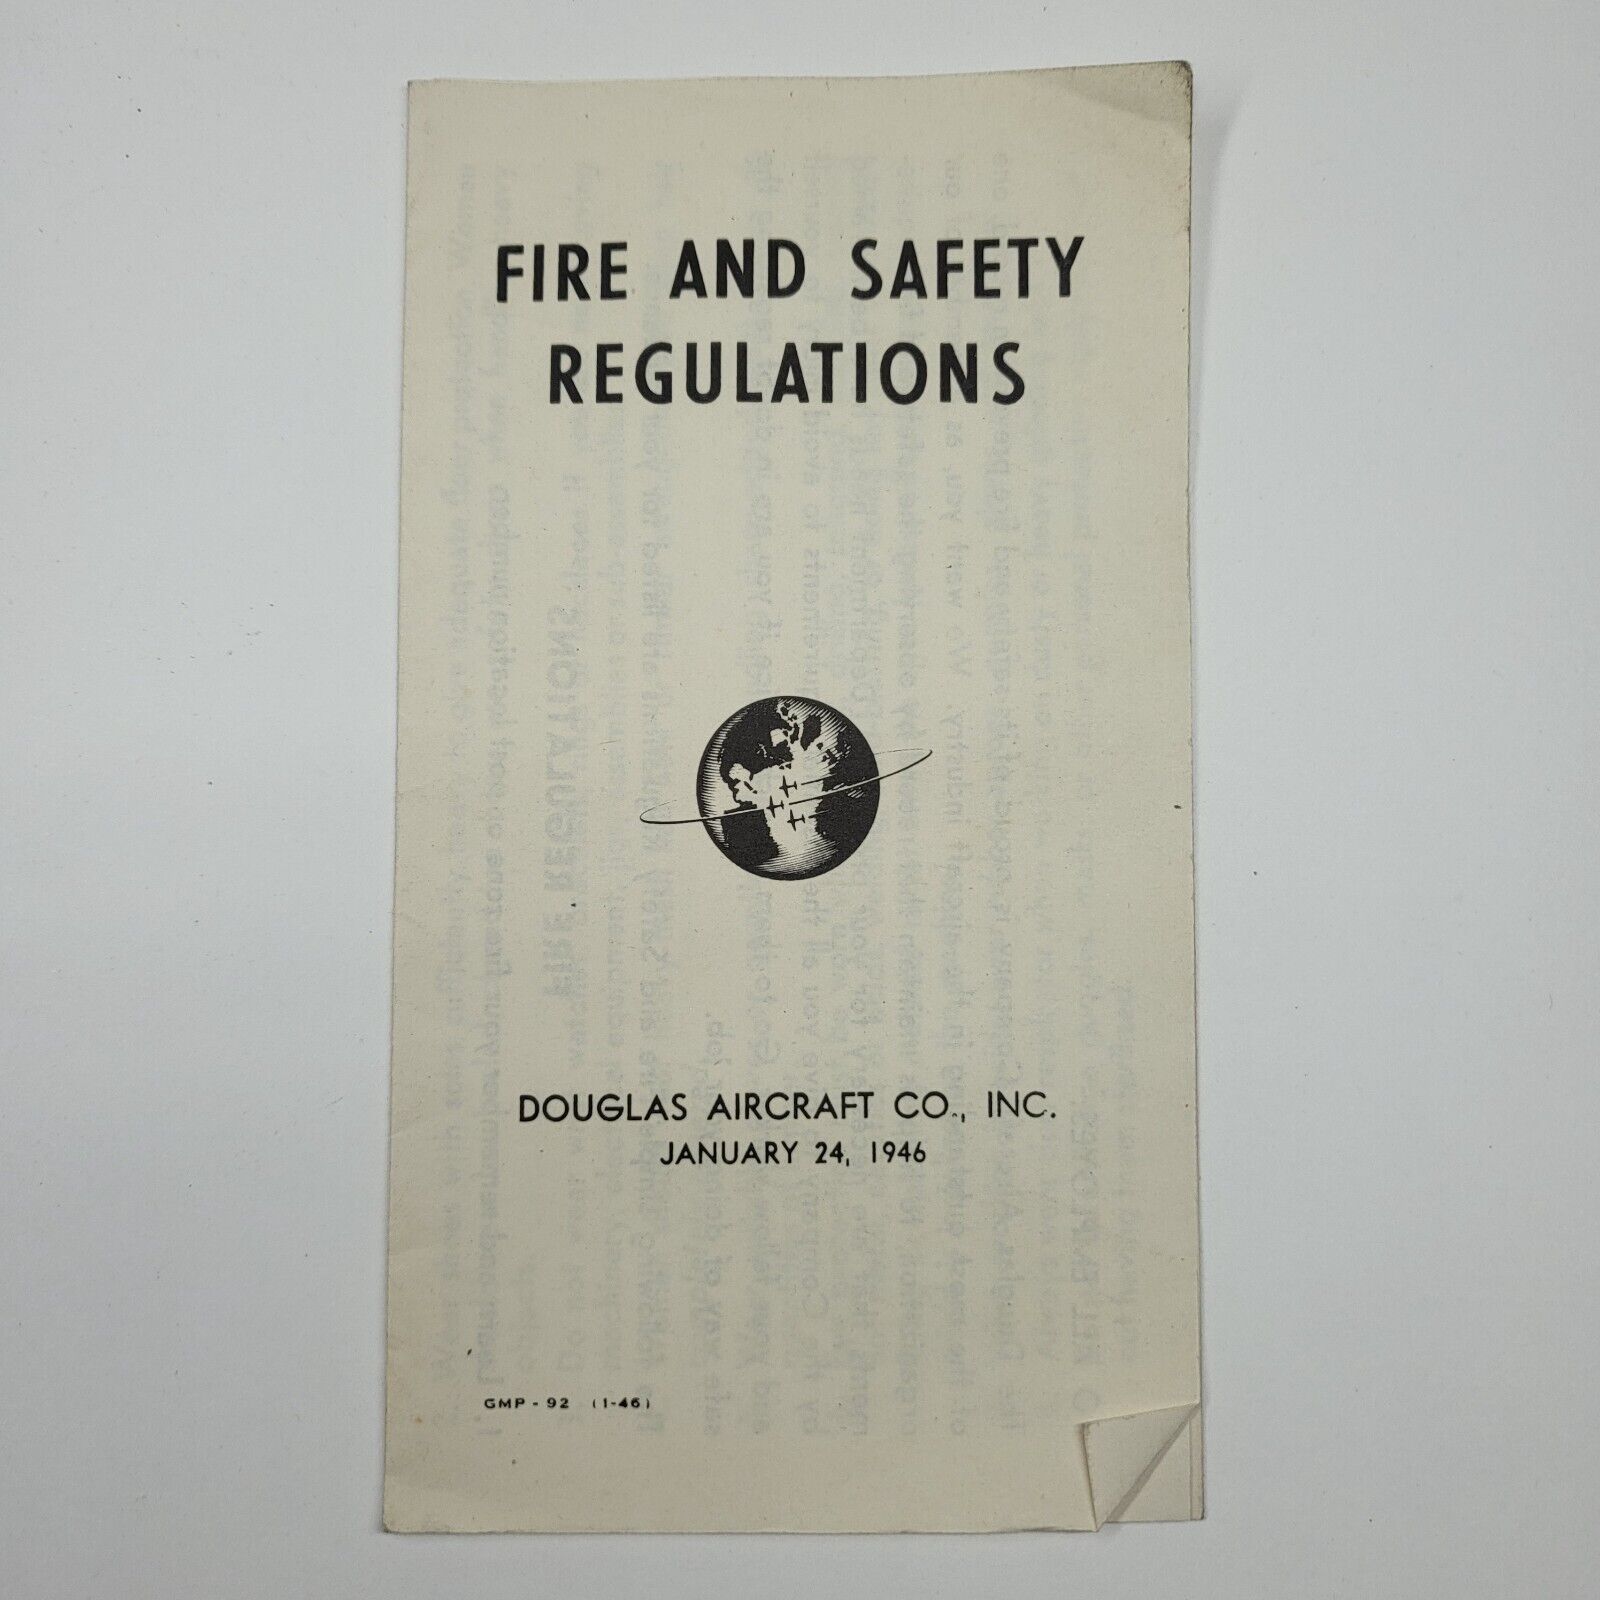 Douglas Aircraft Co Fire and Safety Regulations Pamphlet 1946 Employee Manual